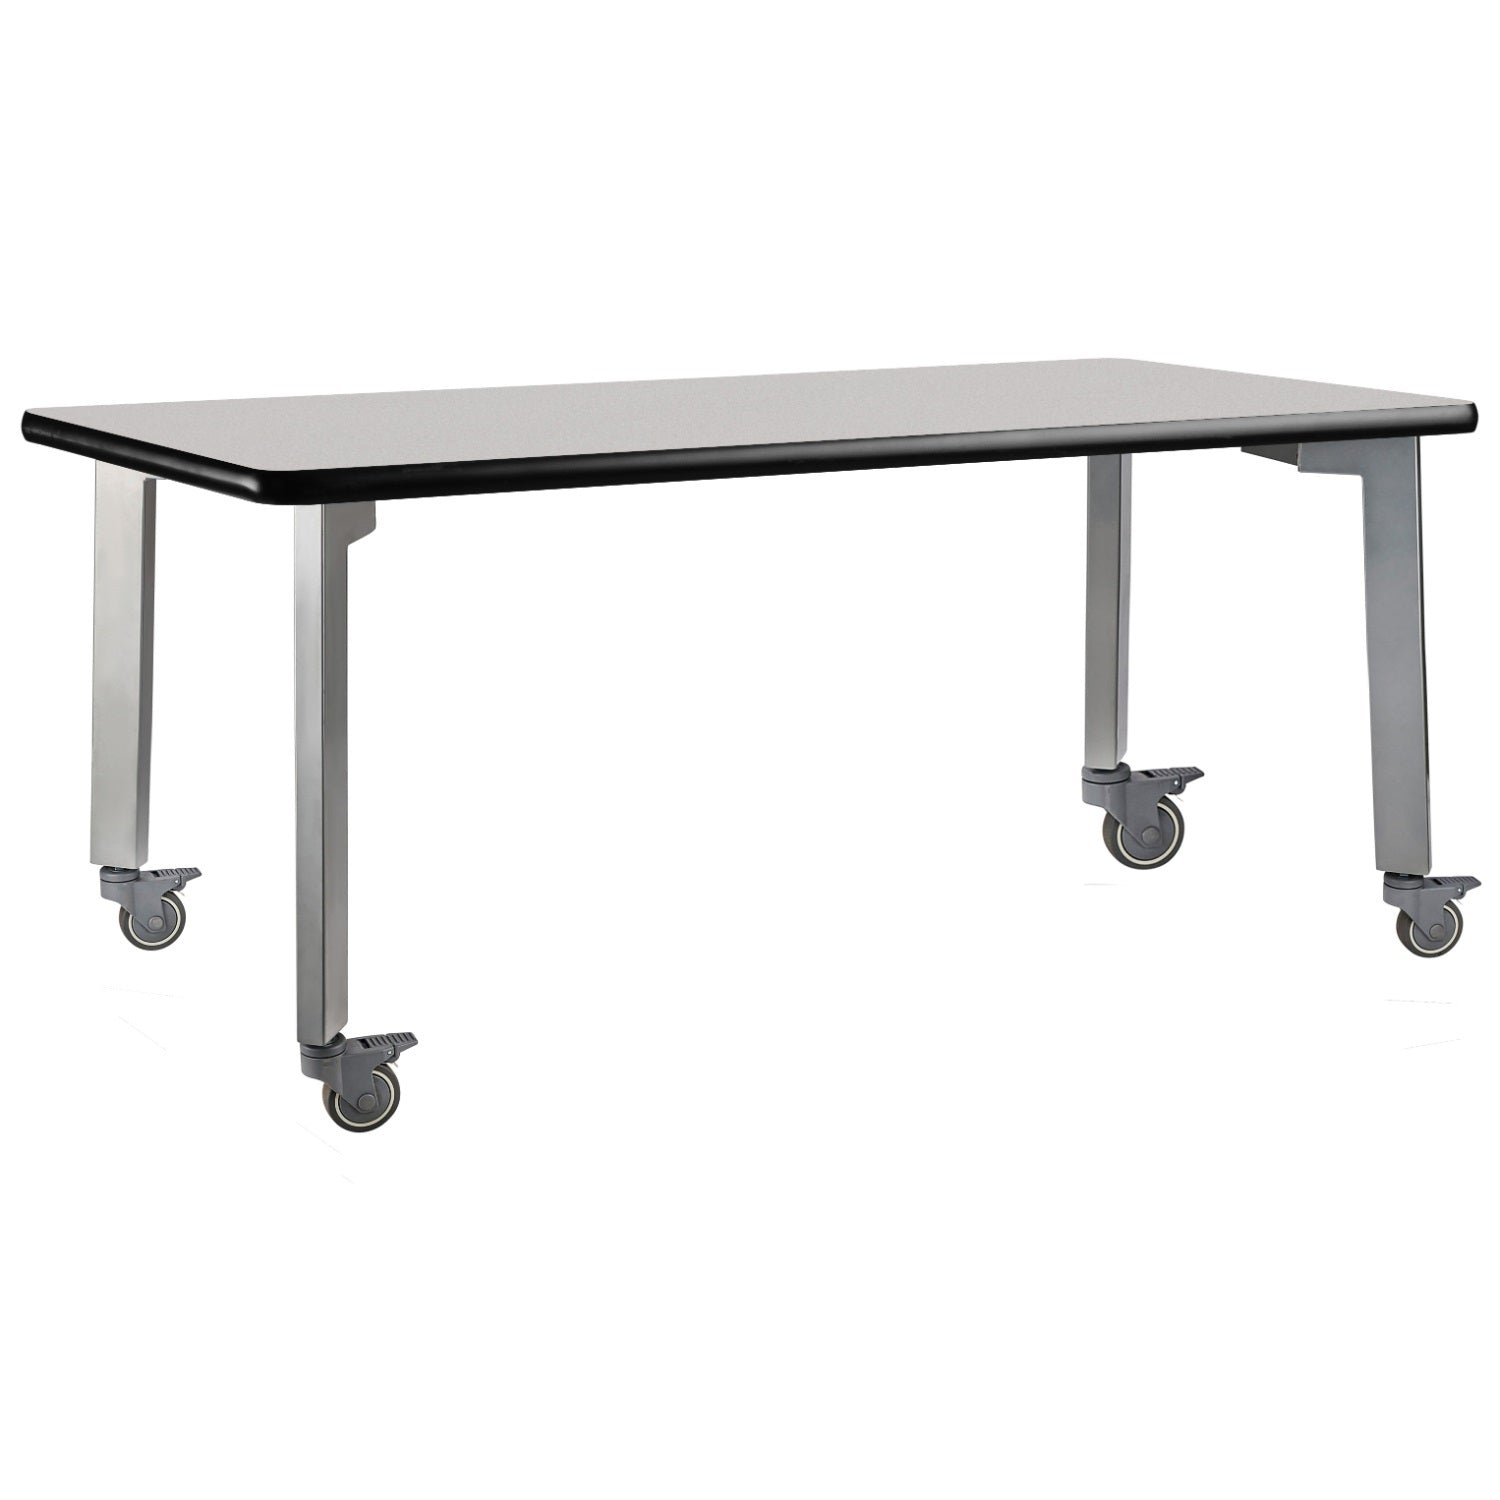 Titan Mobile Table, 24" x 54", Supreme High Pressure Laminate Top with MDF Core and ProtectEdge